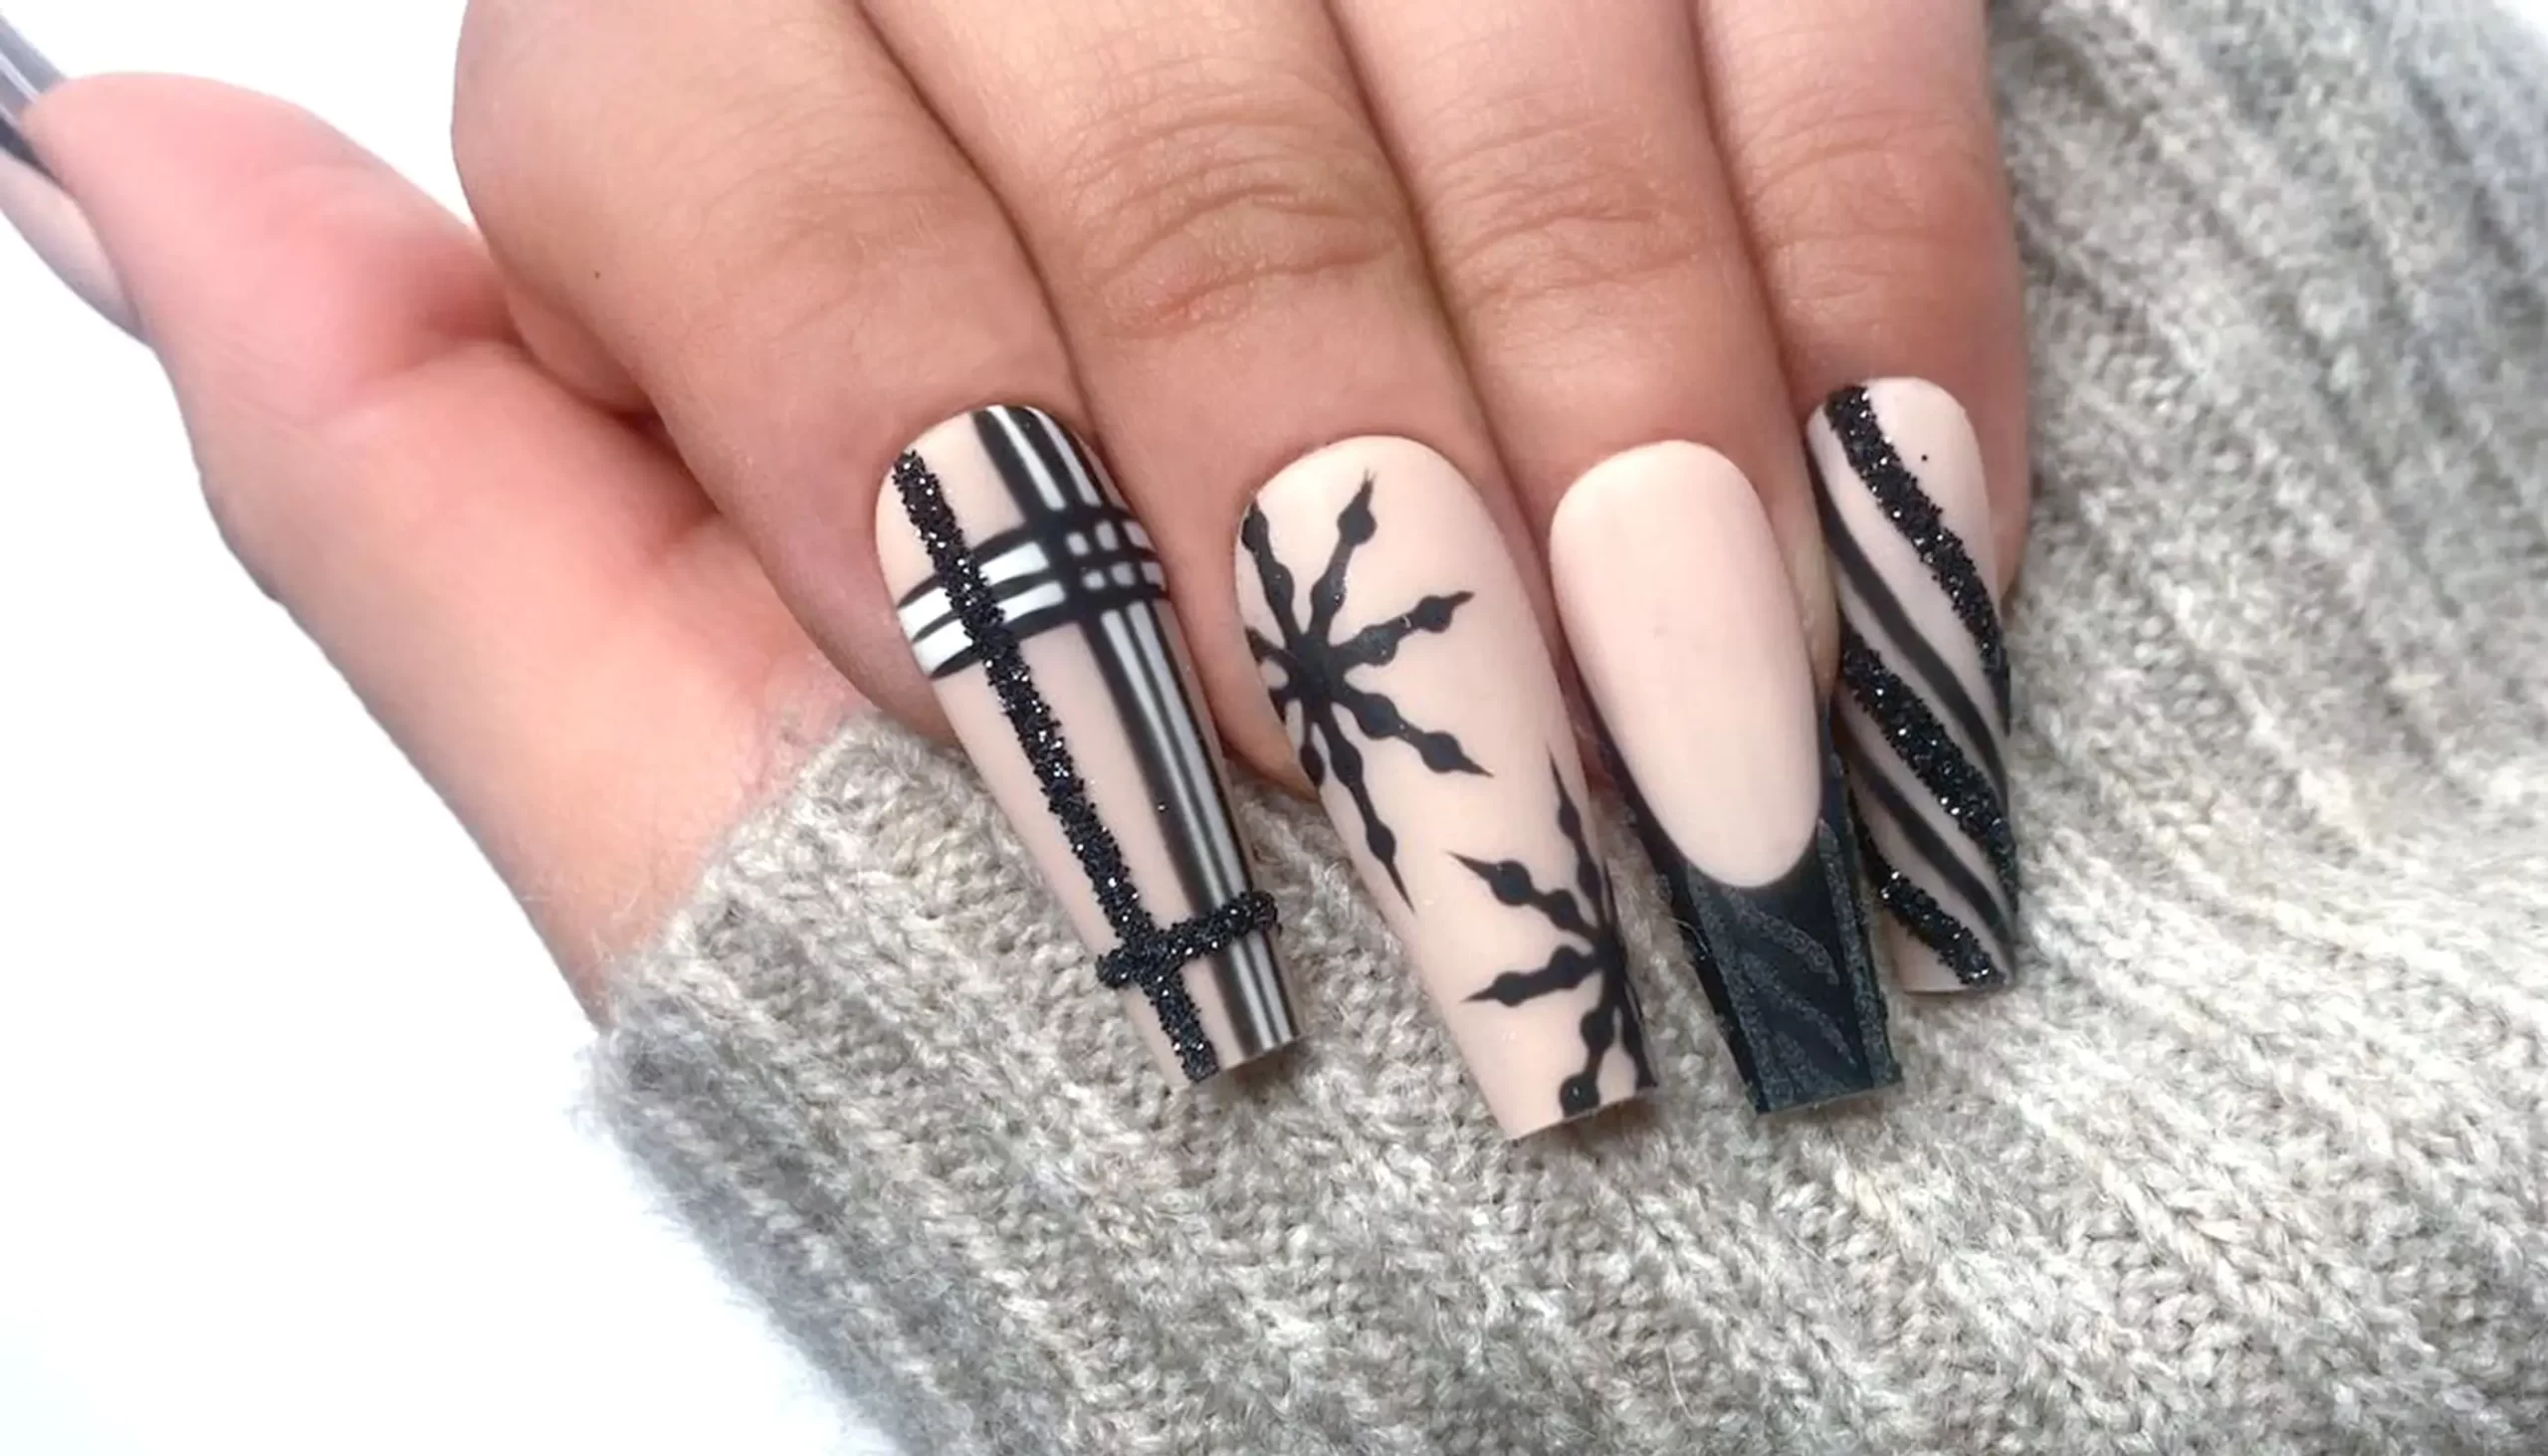 New nail art designs for ladies Archives - StylesGap.com